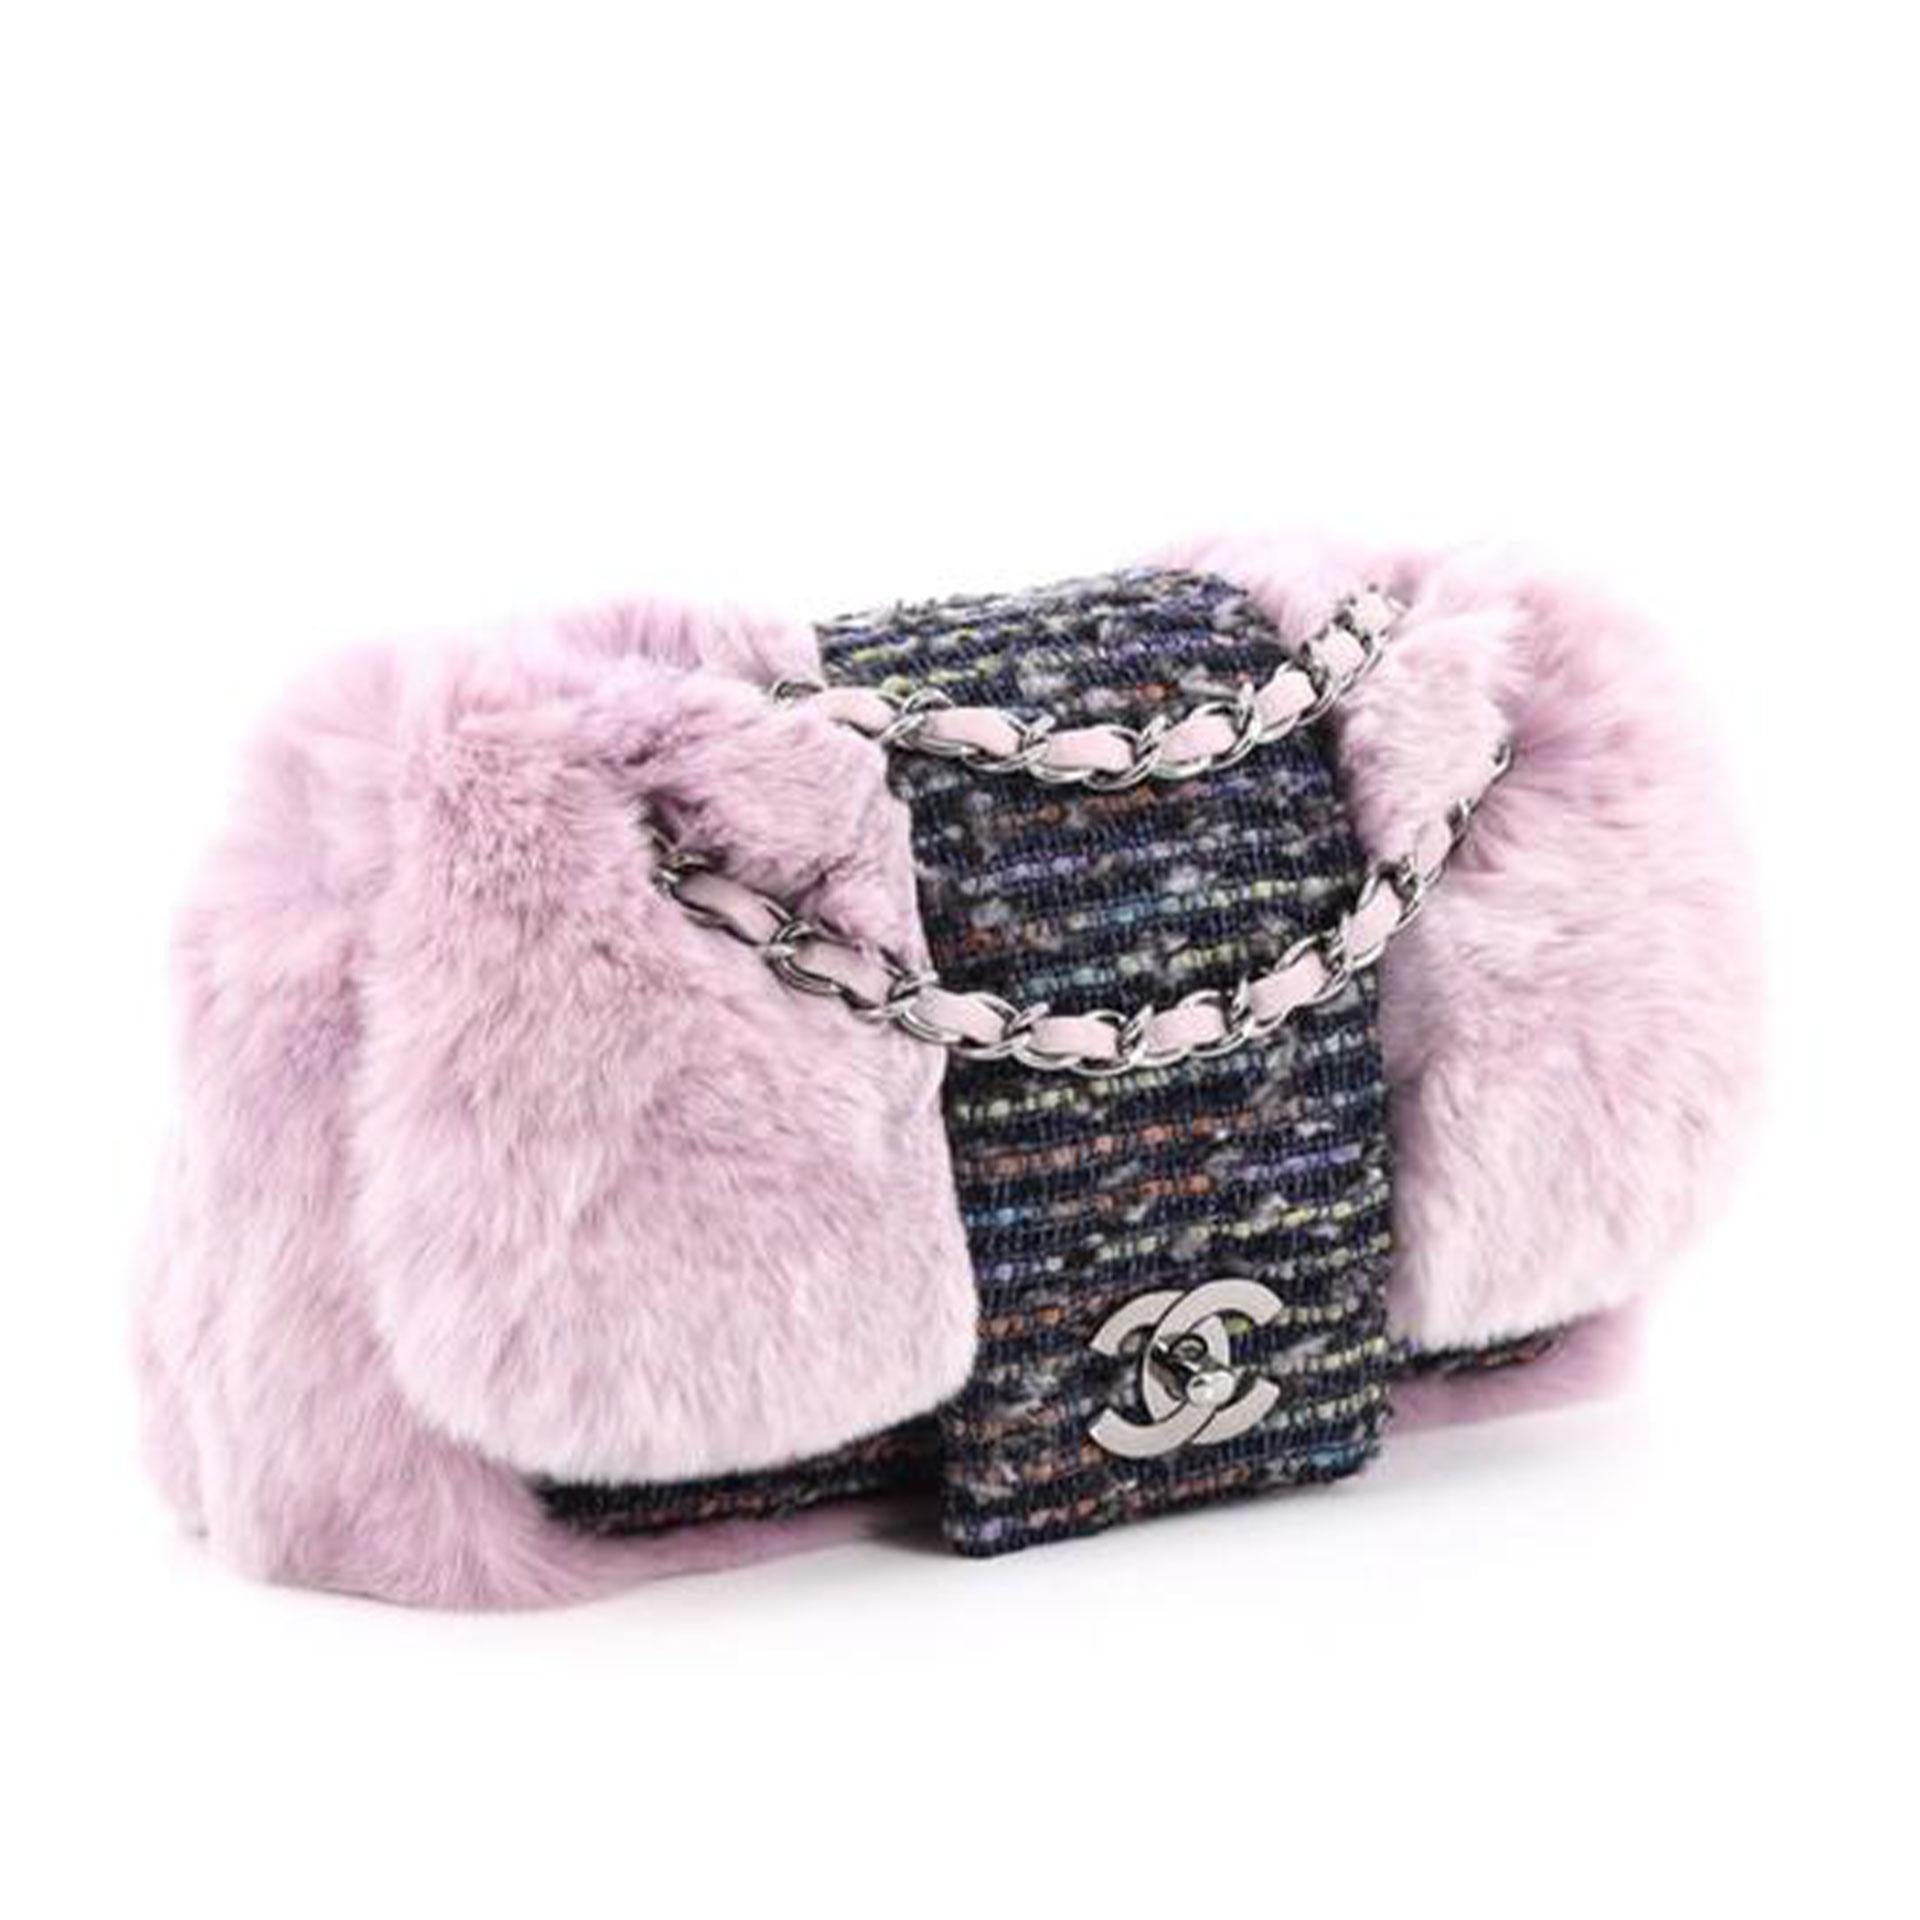 Chanel Classic Flap Vintage 2000s Pink & Grey Tweed and Fur Cross Body Bag

2005 {VINTAGE 16 Years}
Light purple genuine rabbit fur with multicolor black, blue and tweed, 
CC turn lock closure 
Classic interwoven chain
ps and chrome-tone hardware